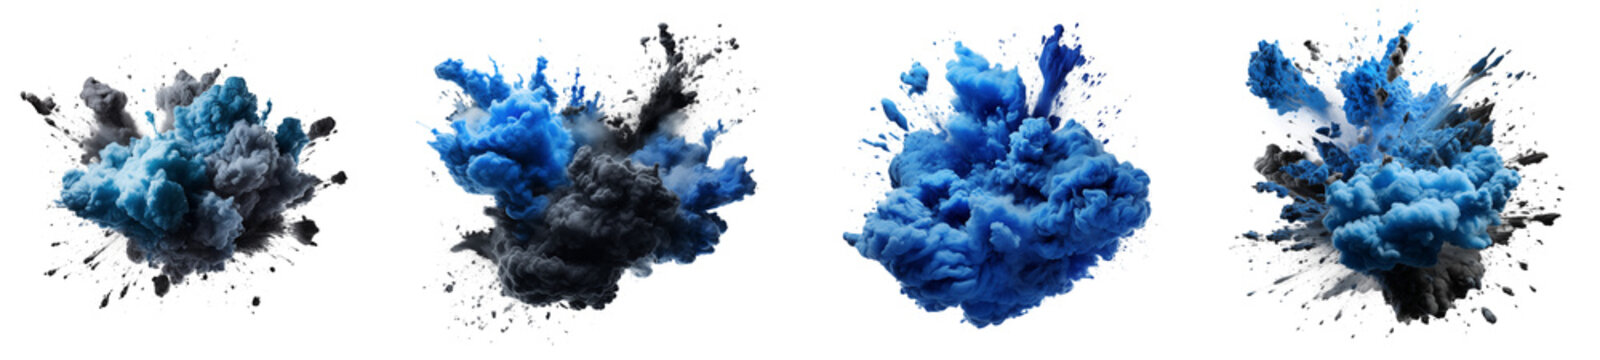 Set of powder explosion blue and black ink splashes, Colorful paint splash elements for design, isolated on white and transparent background